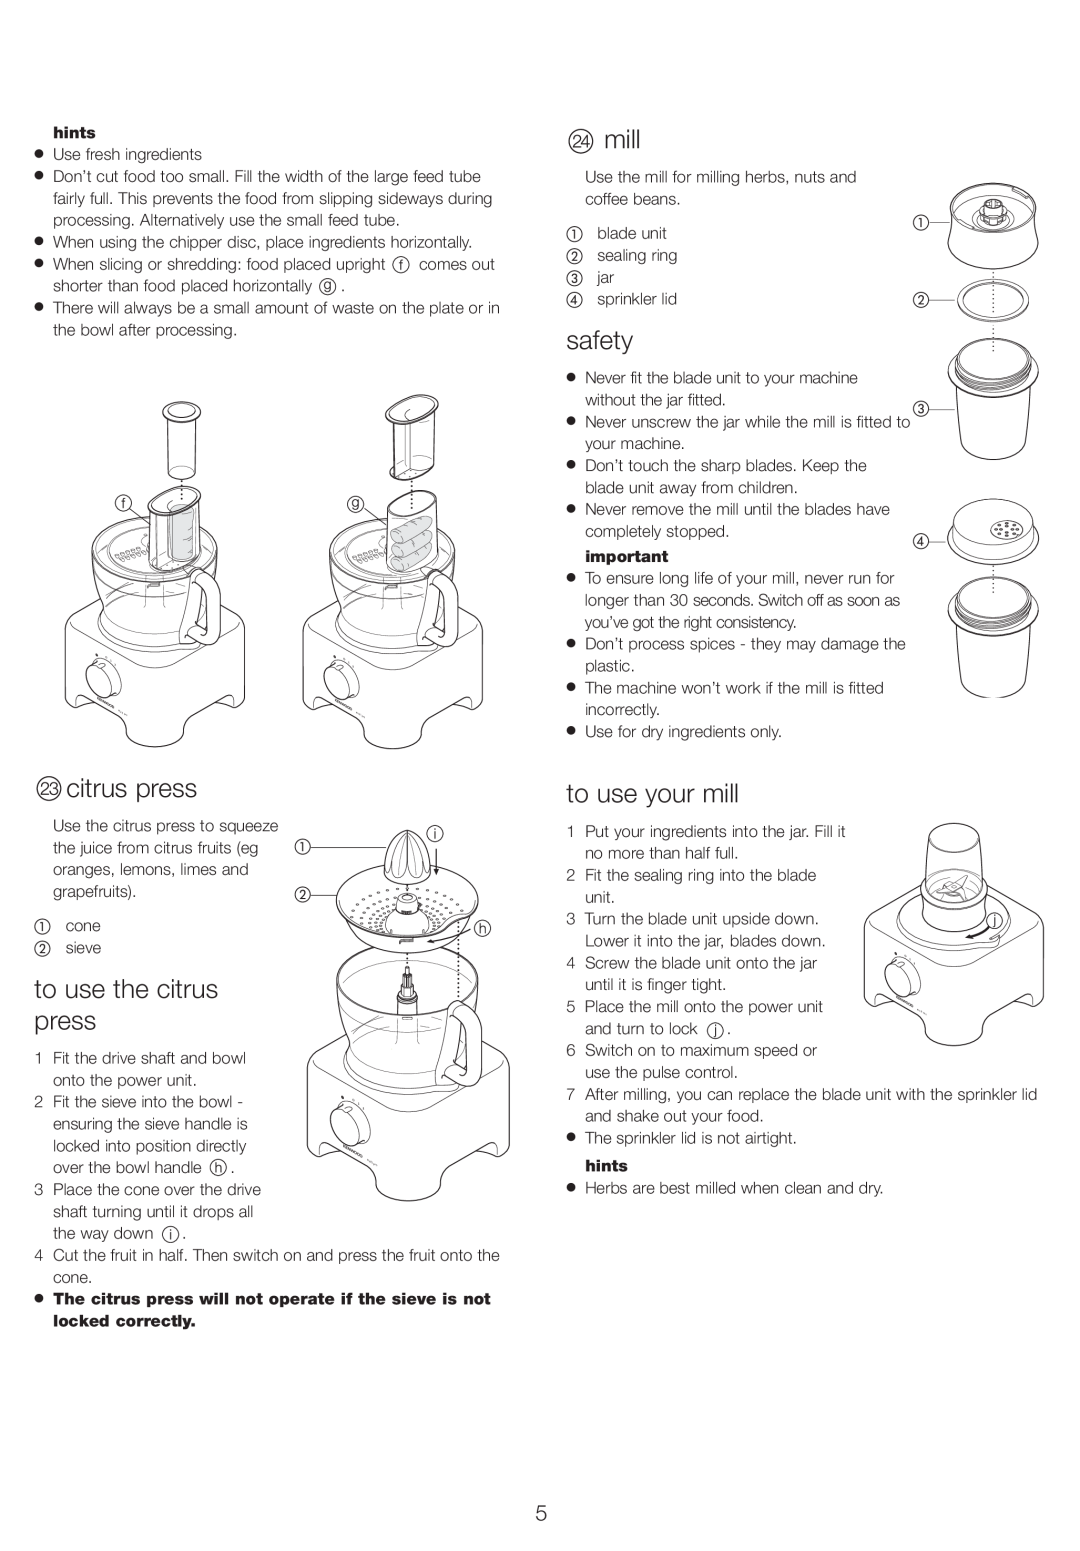 Kenwood FP720, FP710 manual to use the citrus press, to use your mill, locked correctly, safety, hints 